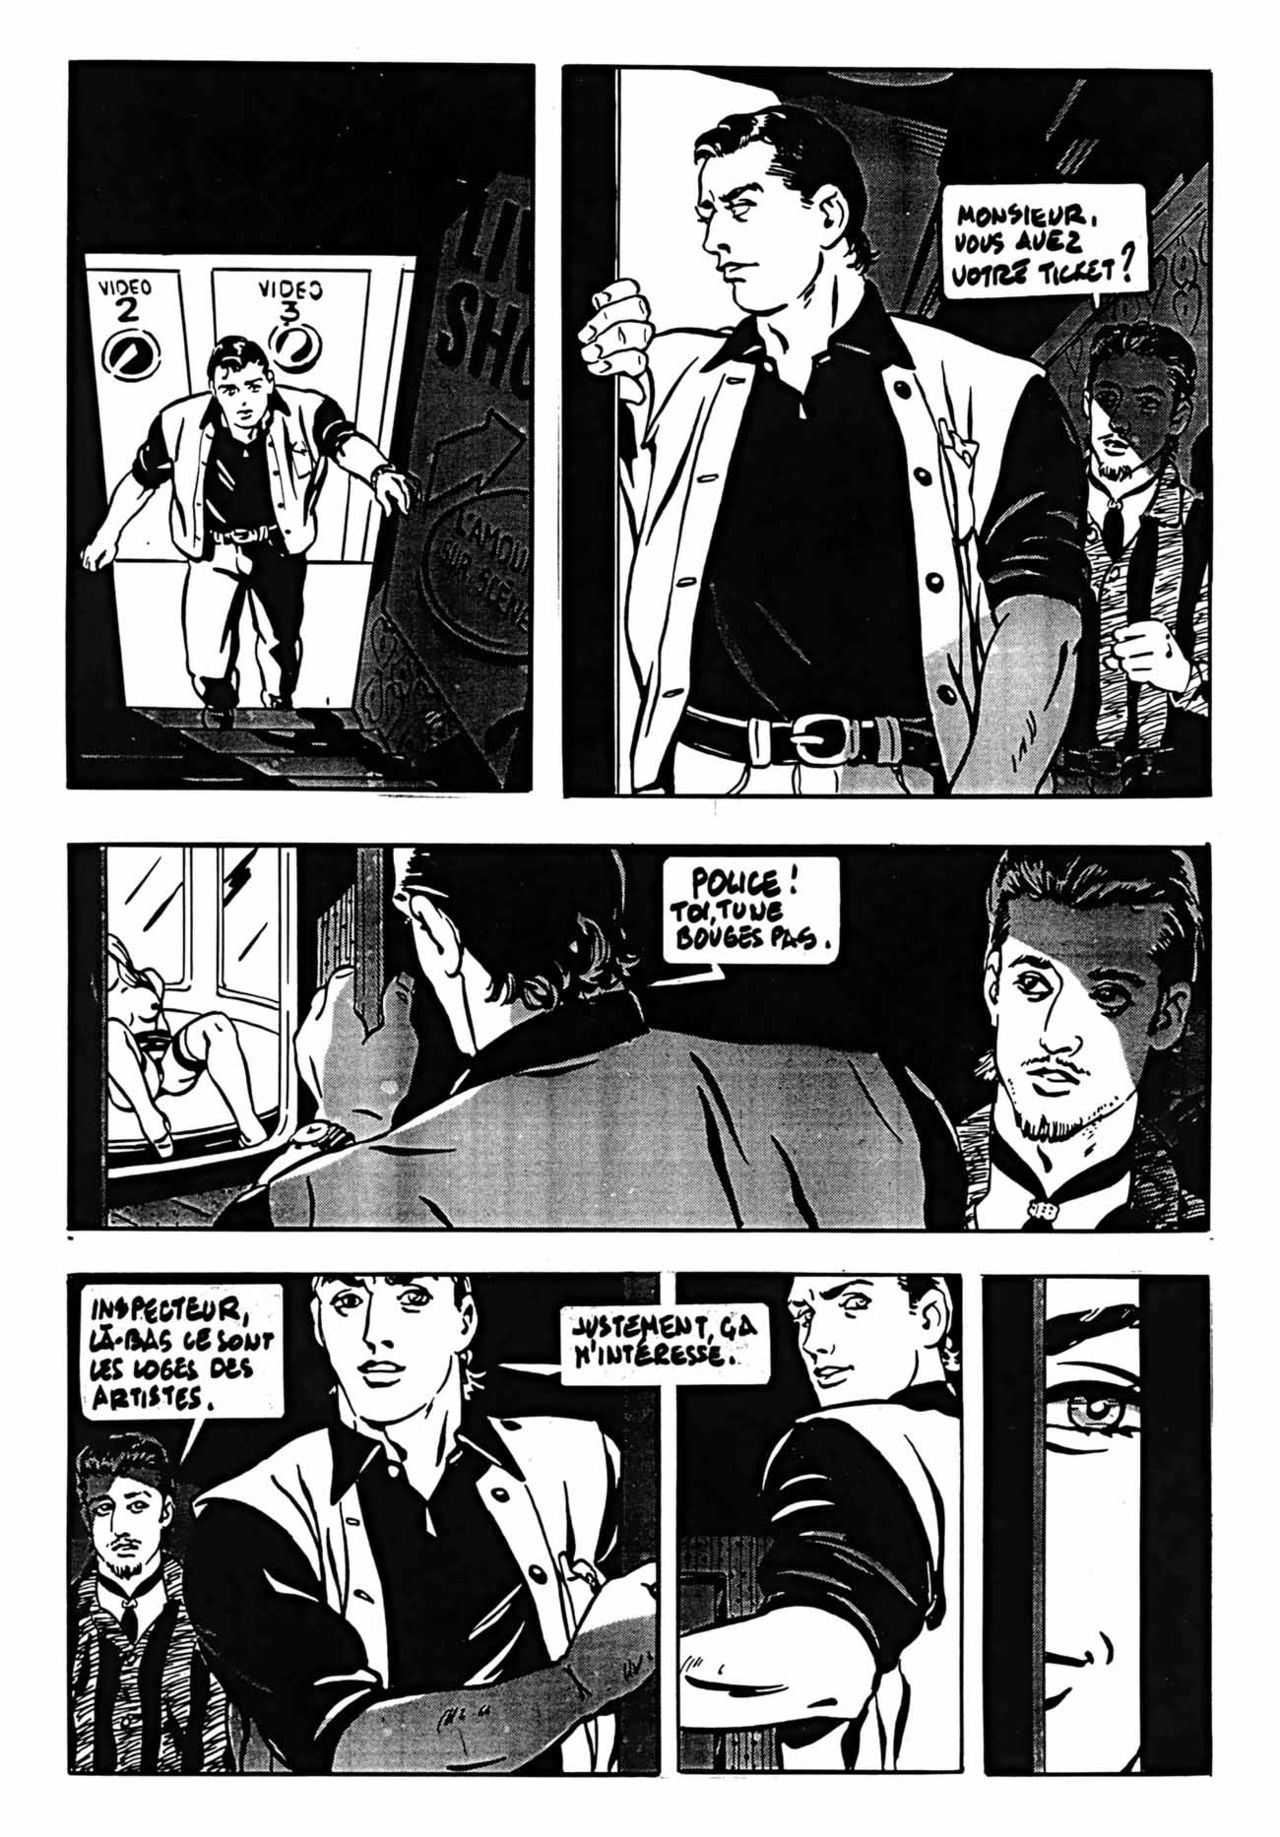 Police By Night - Volume 1 numero d'image 62